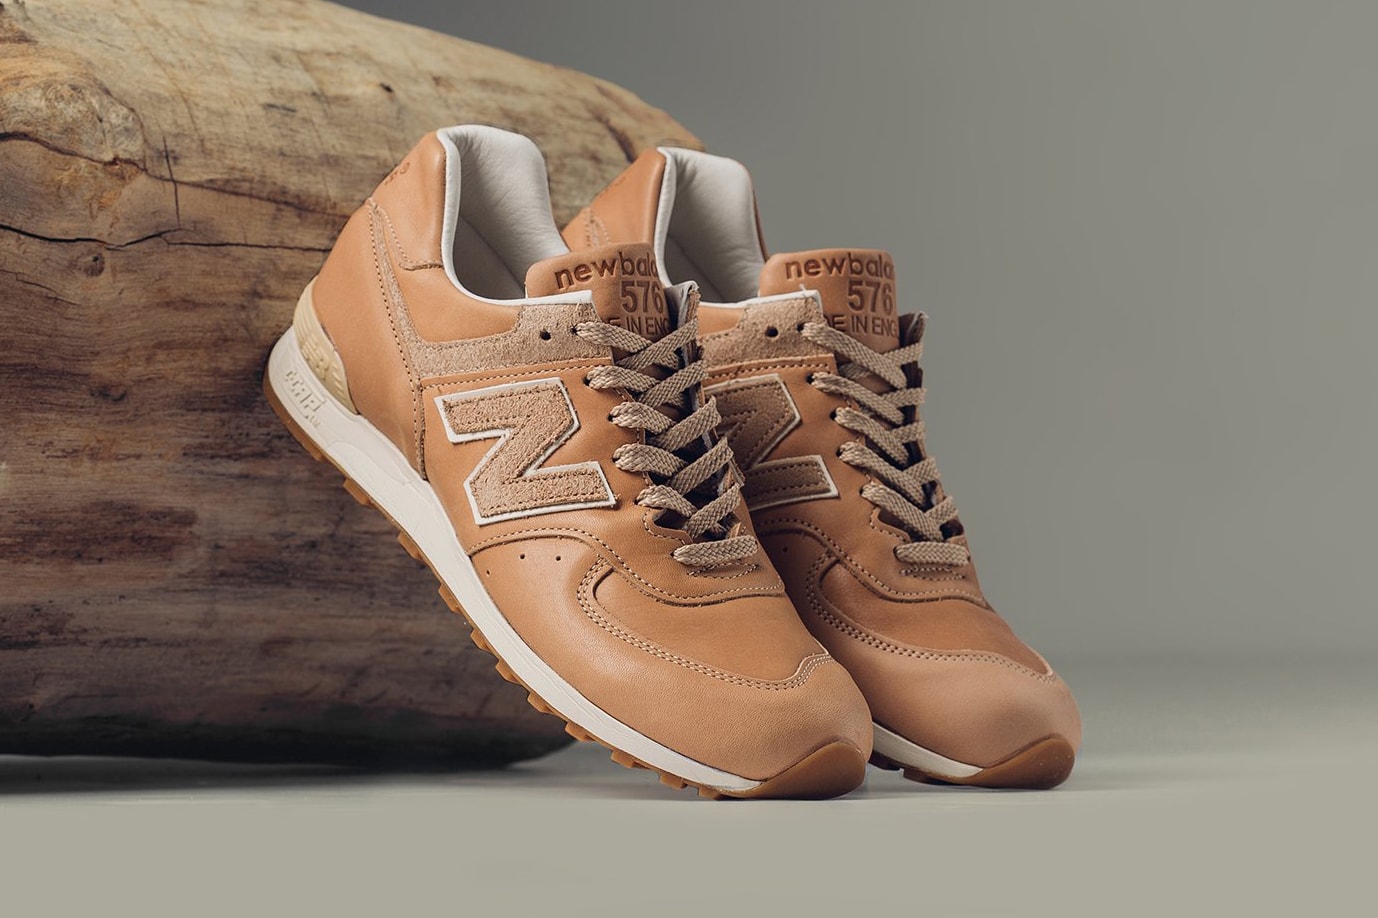 New Balance 576 Vegetable Tanned Horween Leather Footwear Shoes Sneakers